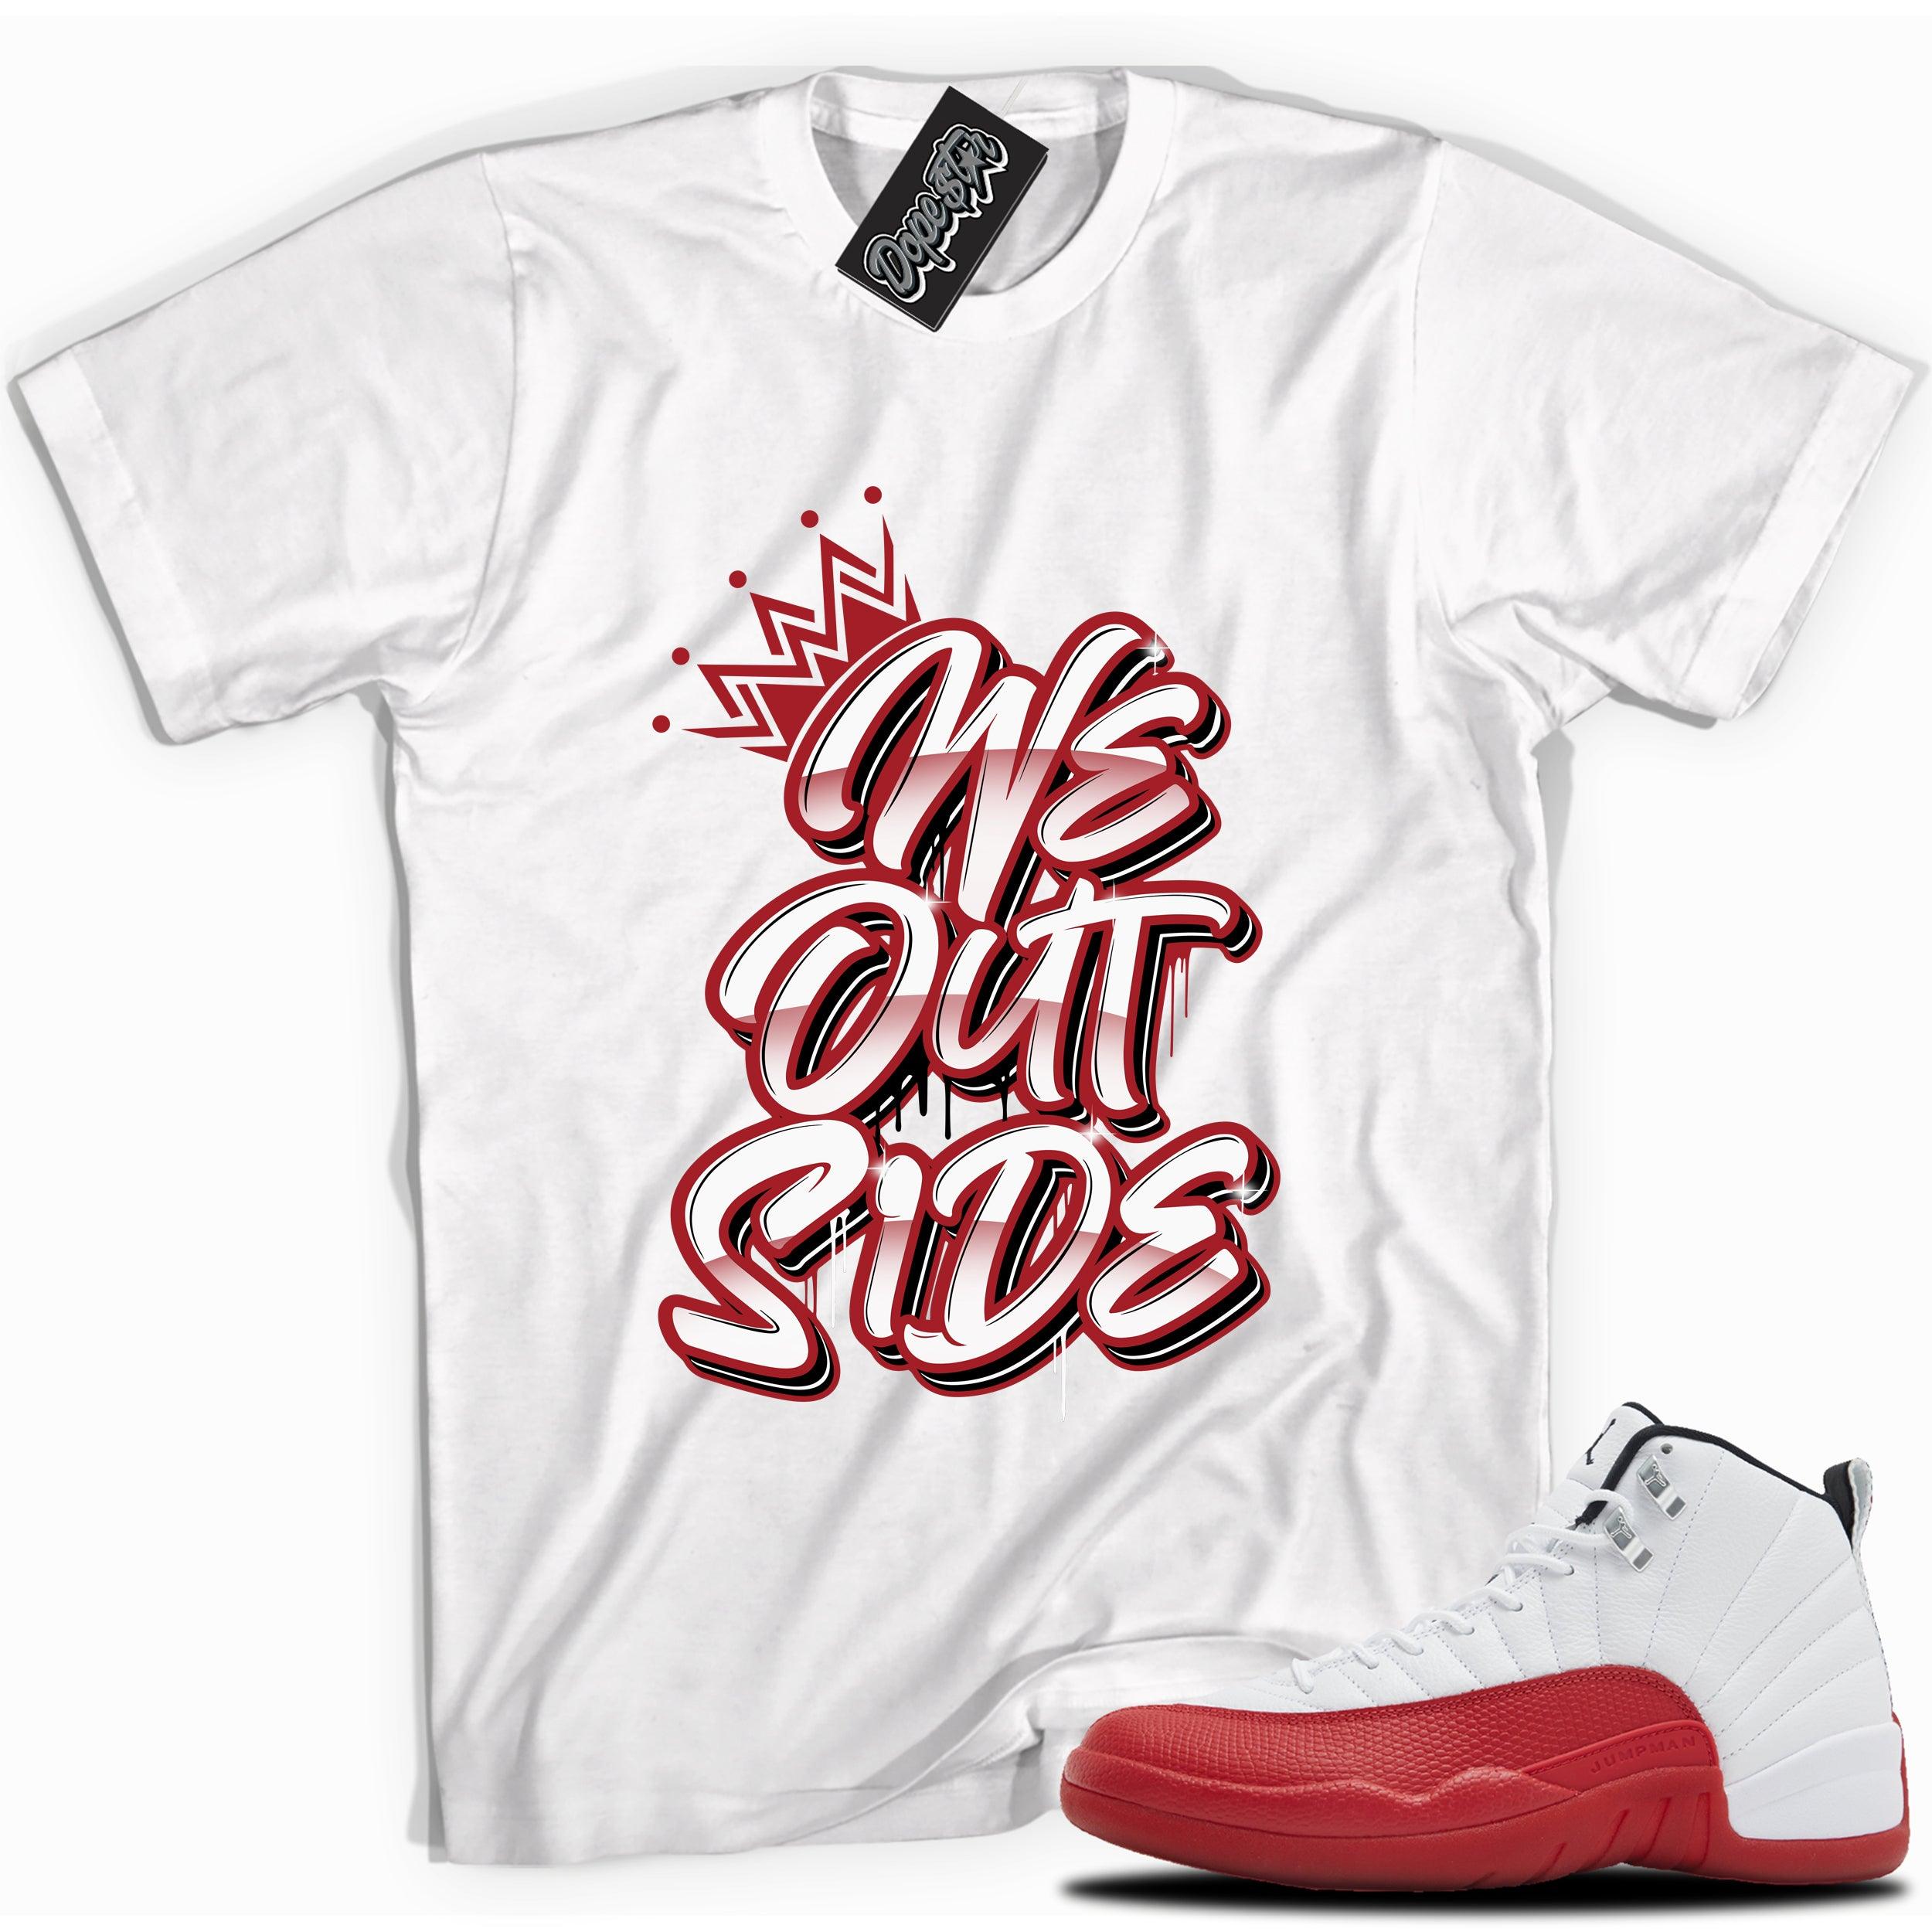 Cool white graphic tee with “We Out Side” print, that perfectly matches Air Jordan 12 Retro Cherry Red 2023 red and white sneakers 